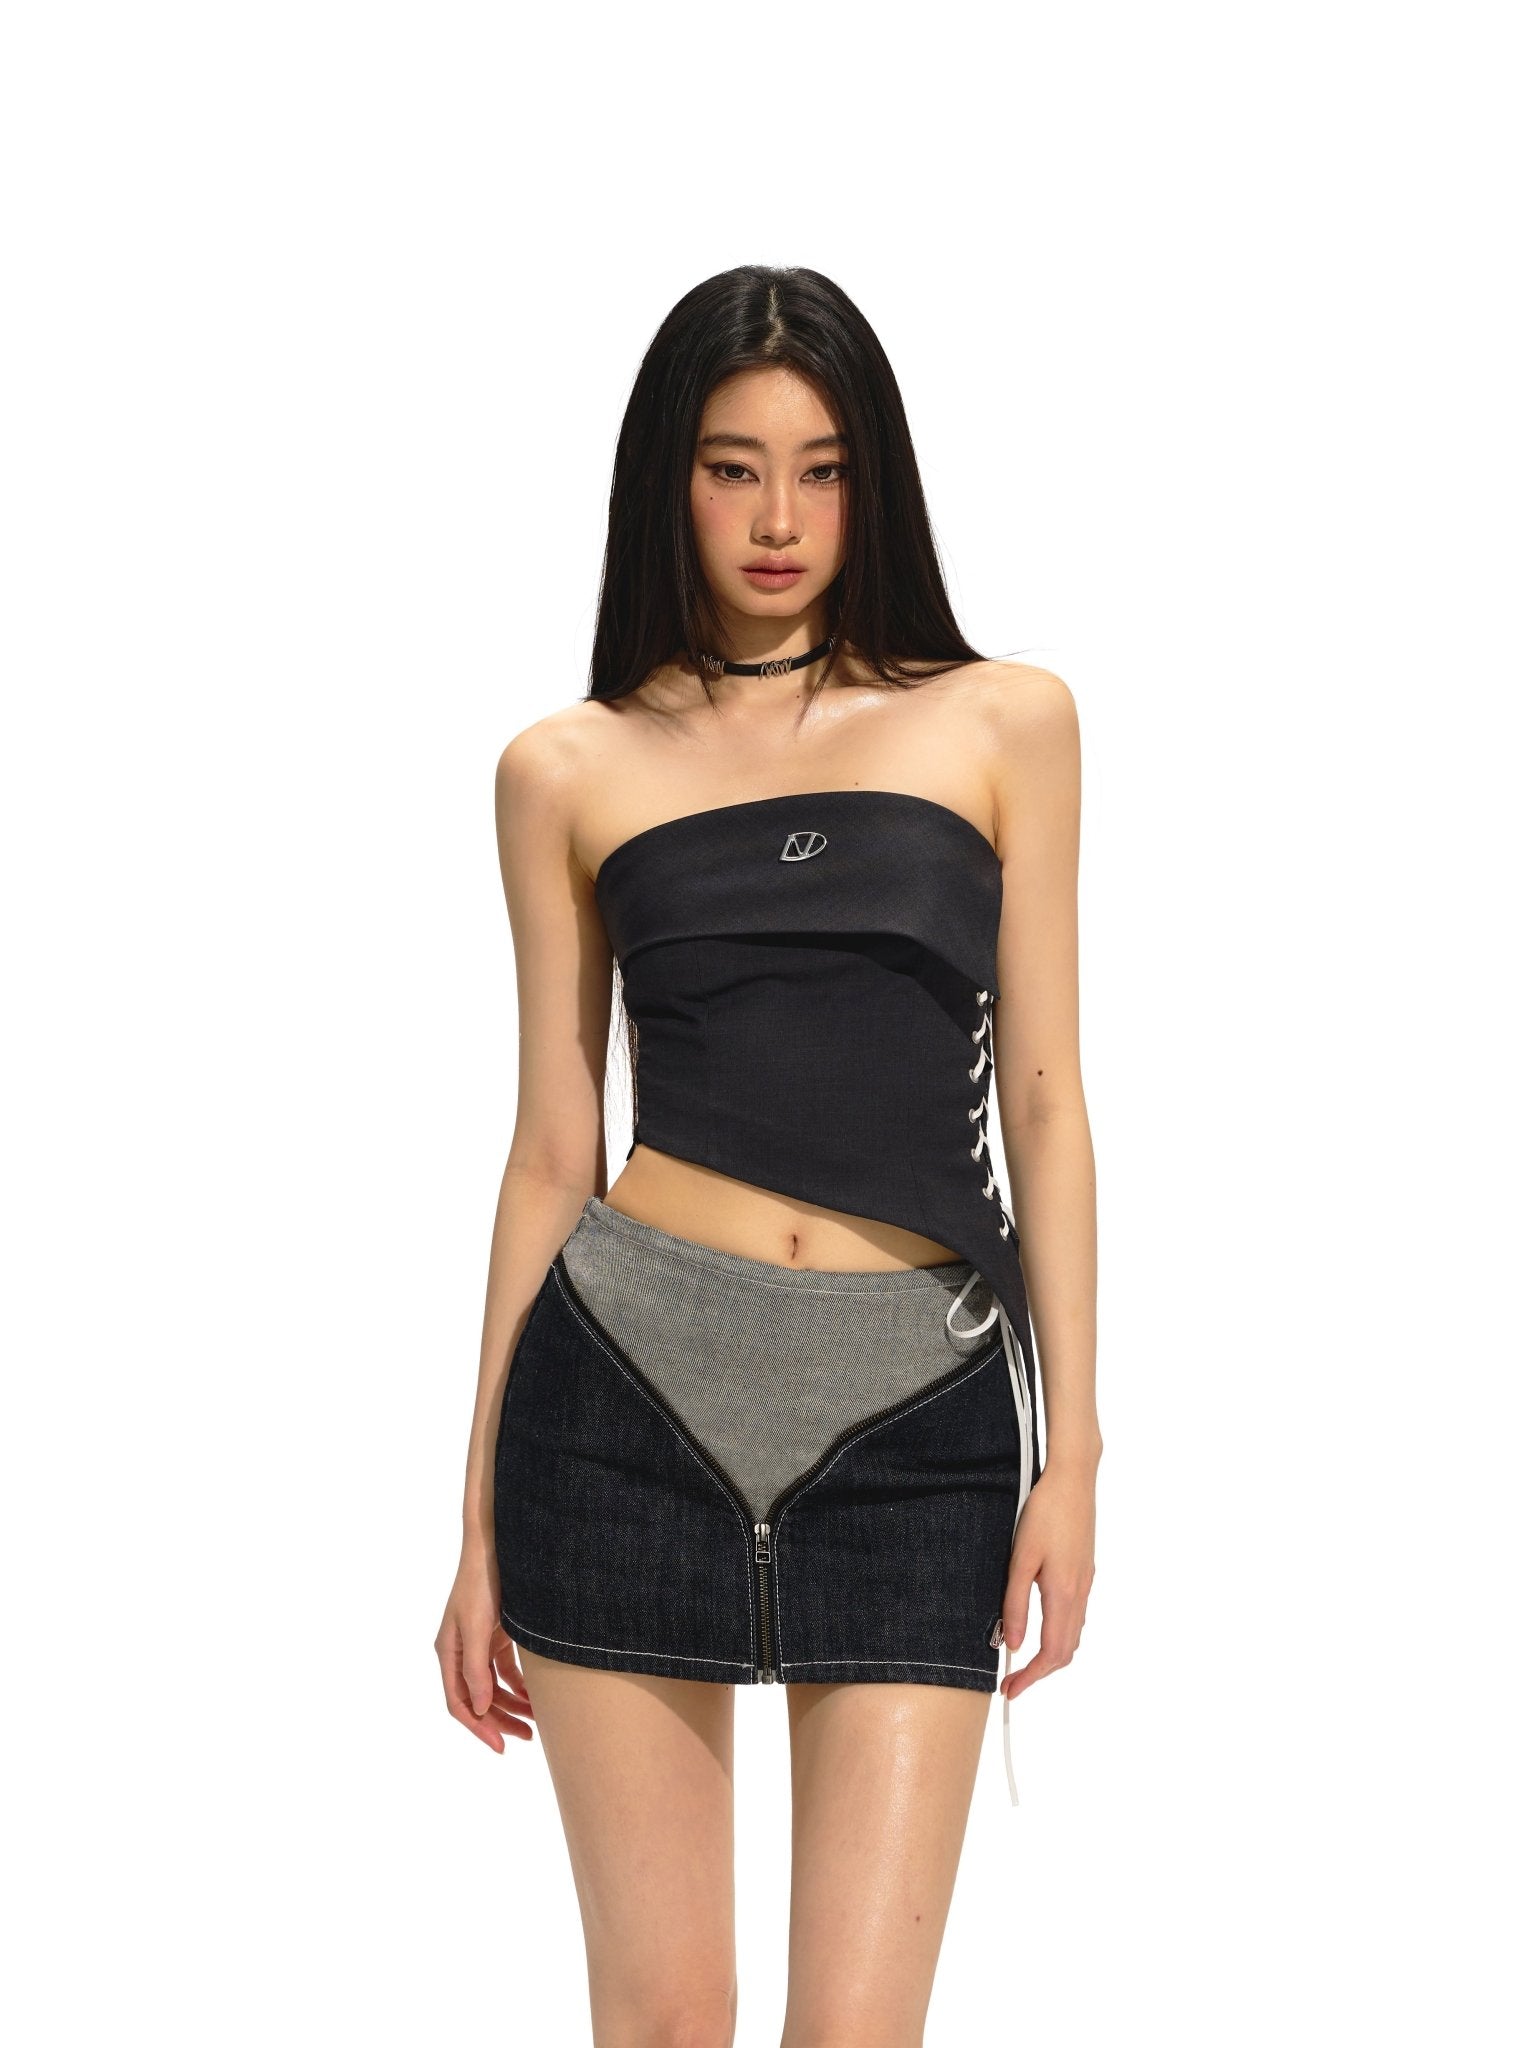 NAWS Hourglass bustier | MADA IN CHINA